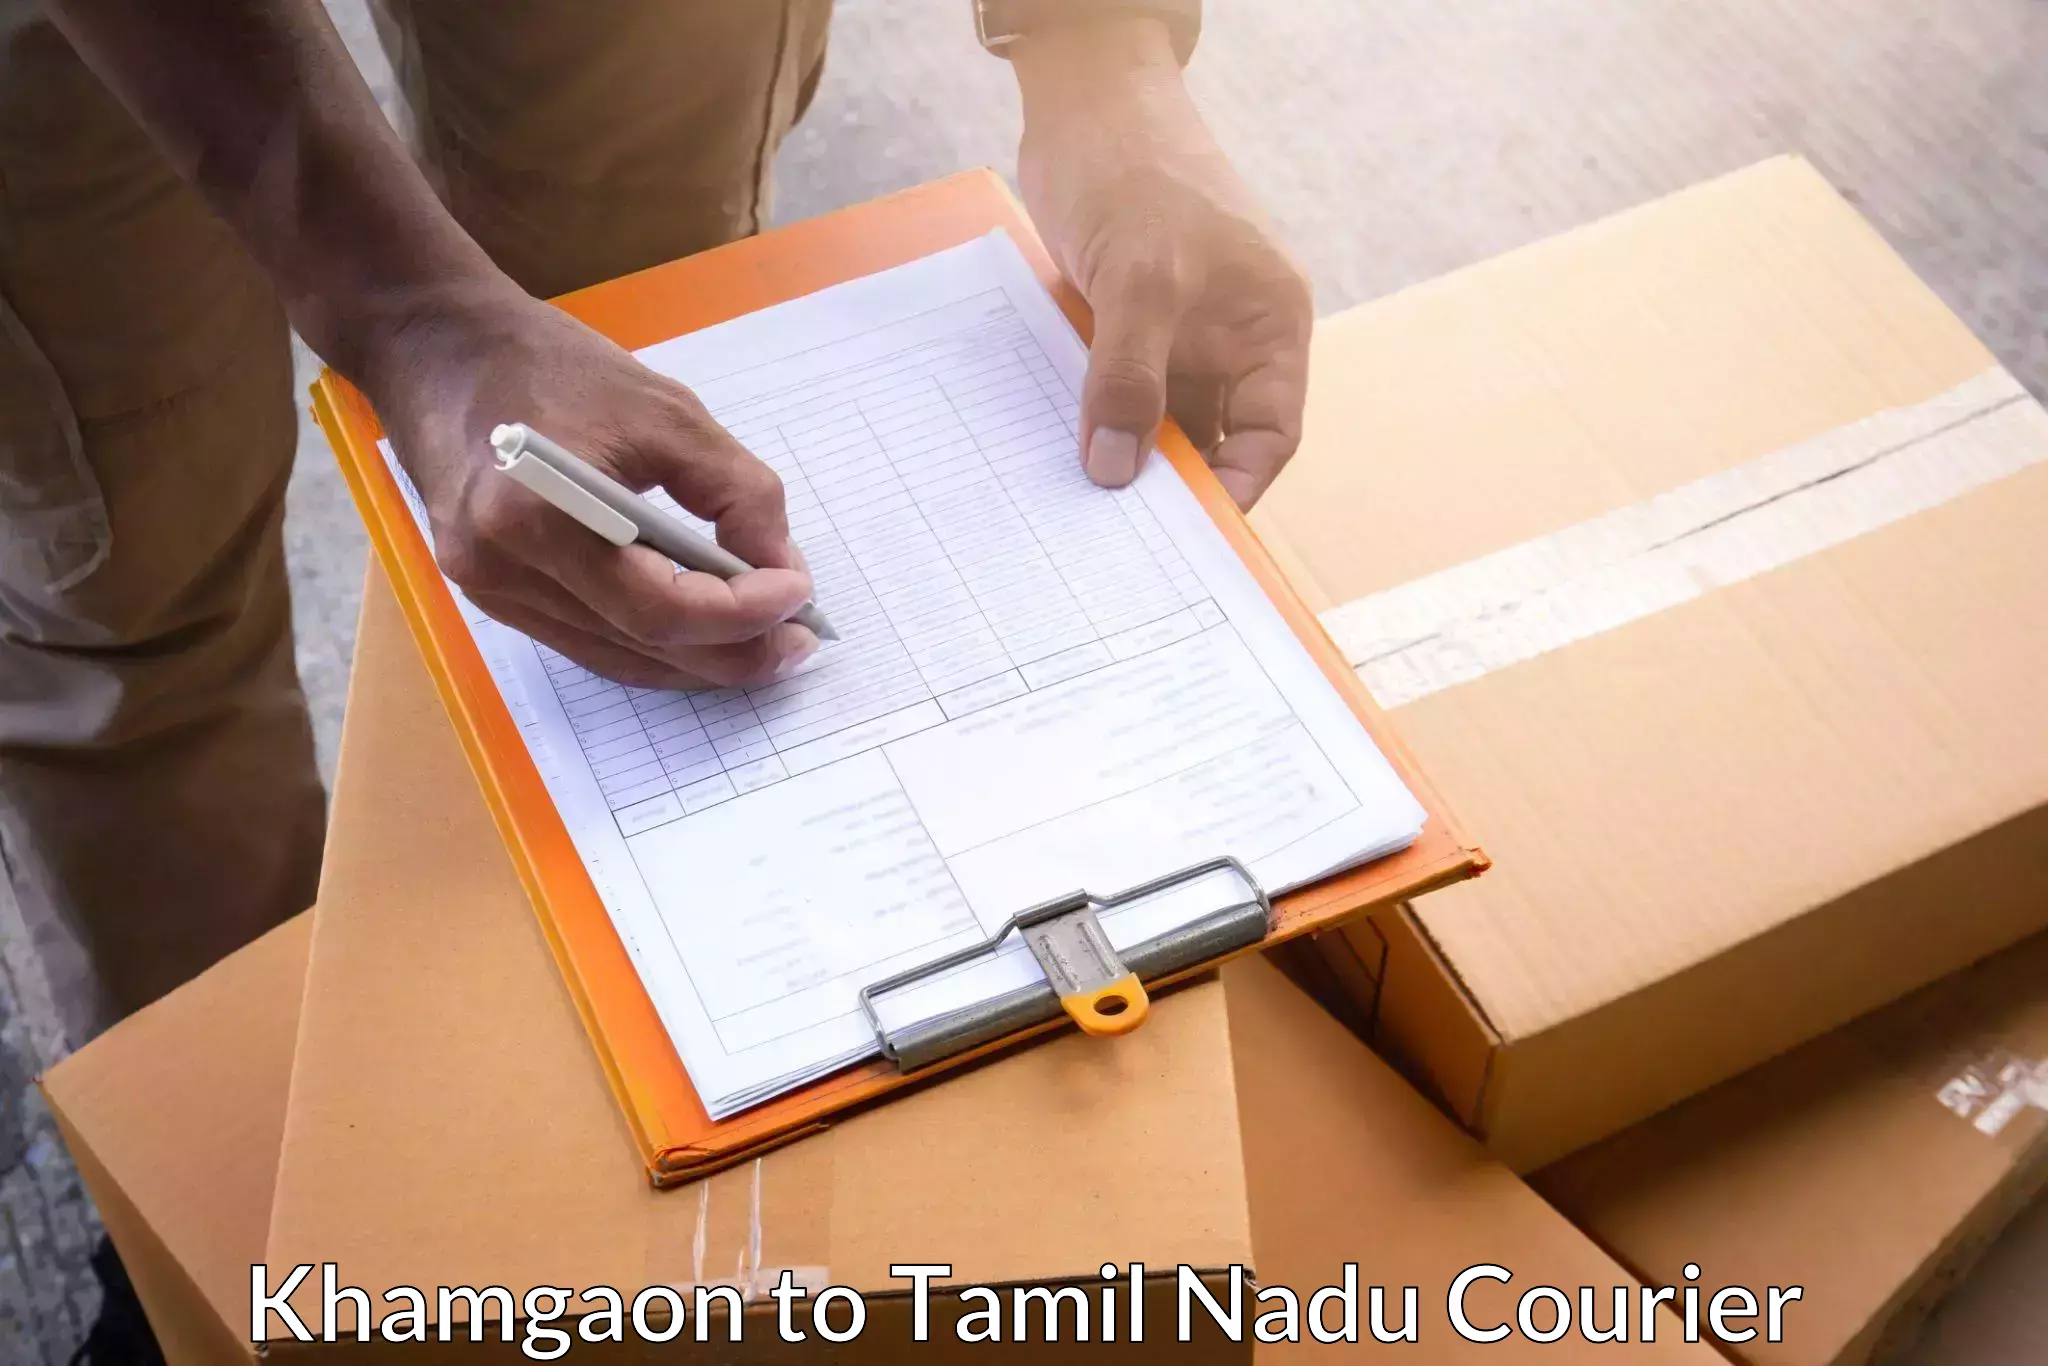 High-quality delivery services in Khamgaon to Tiruchirappalli